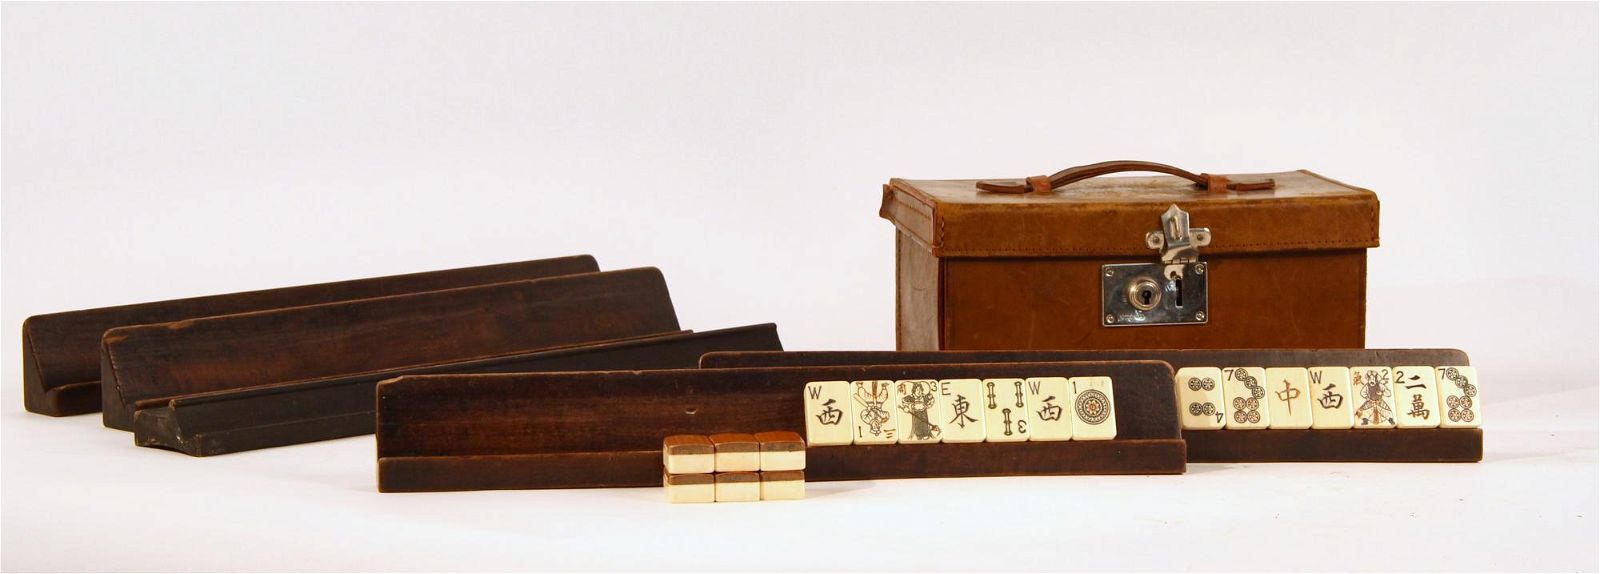 A MAHJONG SET IN A LEATHER TRAVELING 2fb281b